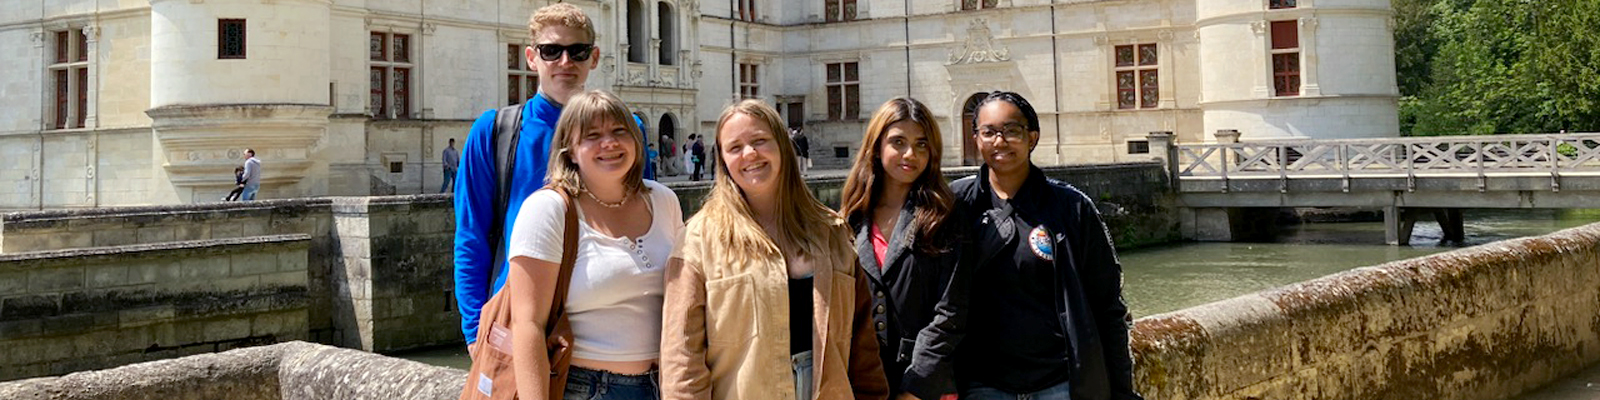 5 UNF French Language Students pose in front of Château d'Azay-le-Rideau during their summer Study Abroad in Tours, France